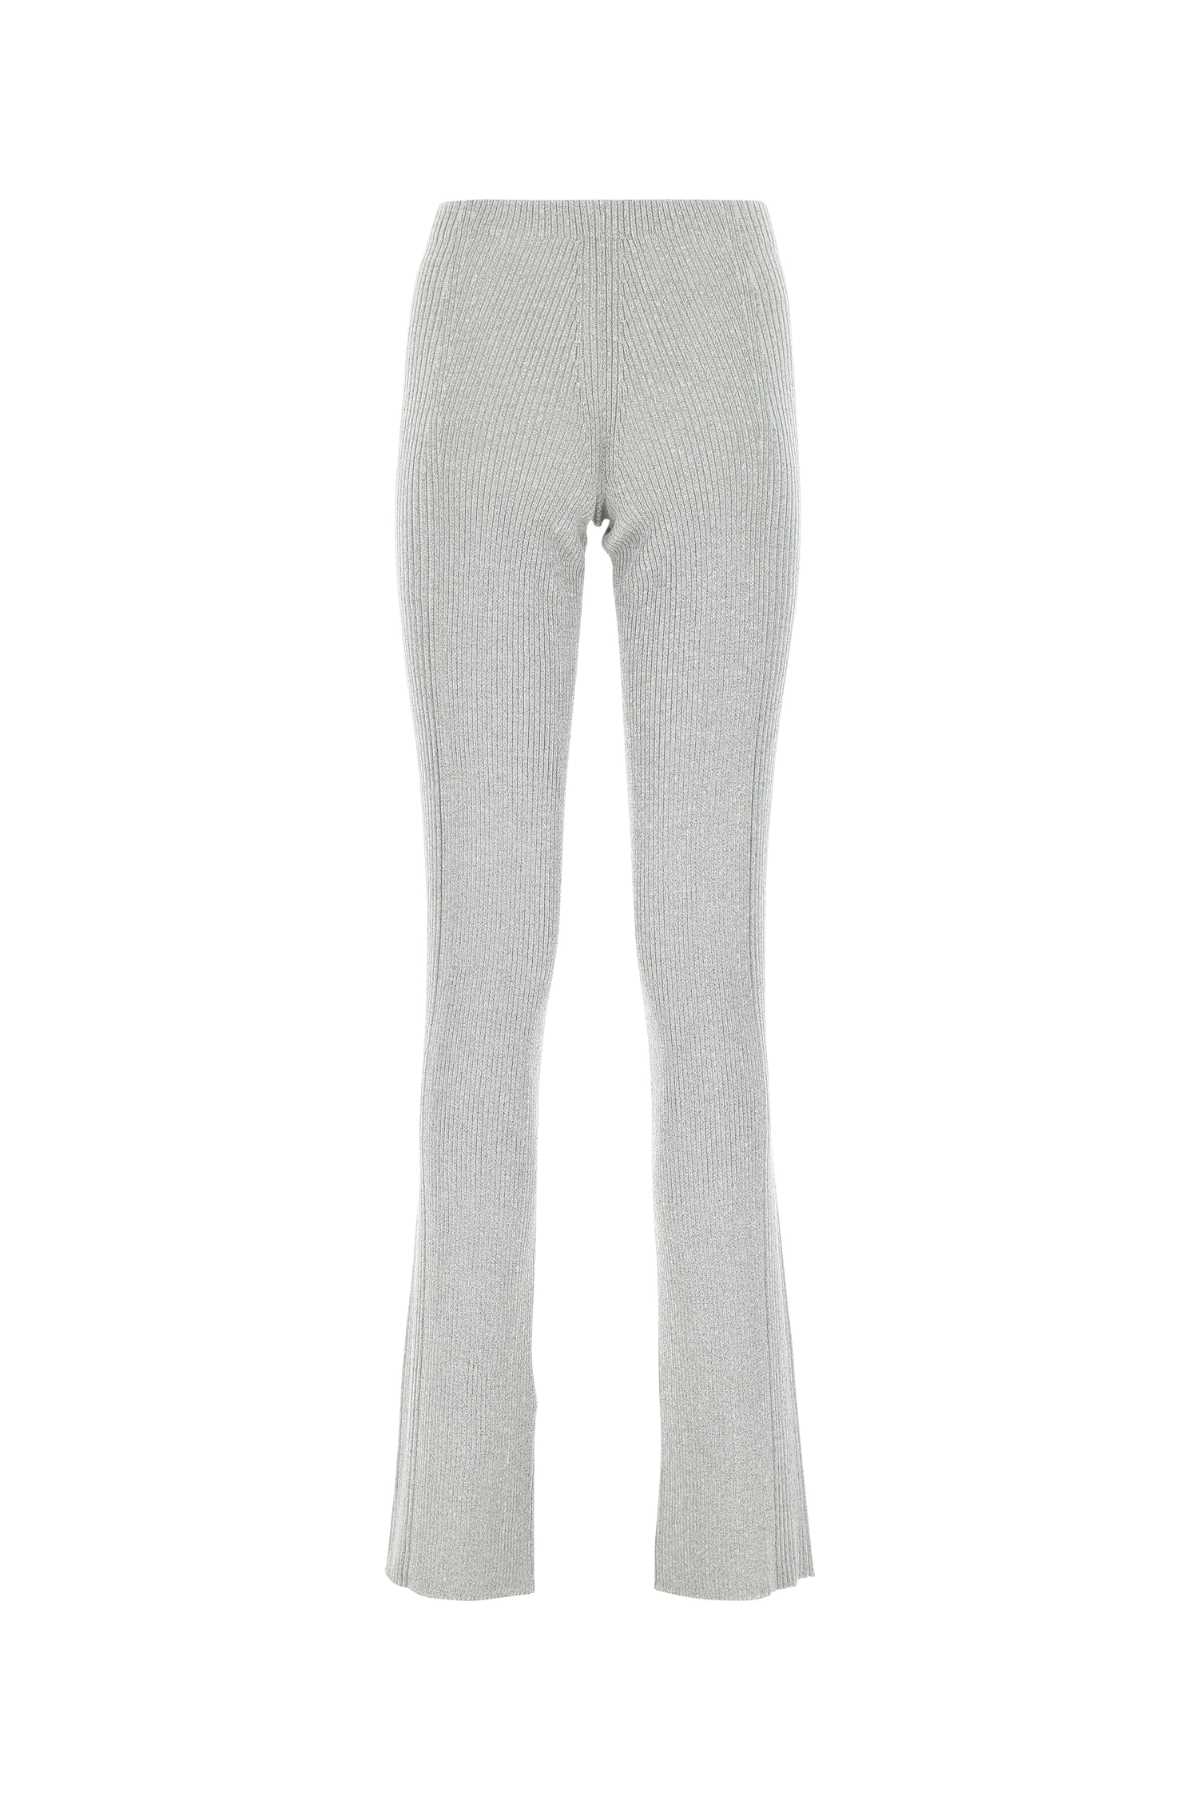 Dion Lee Light Grey Polyester Blend Pant In Silver